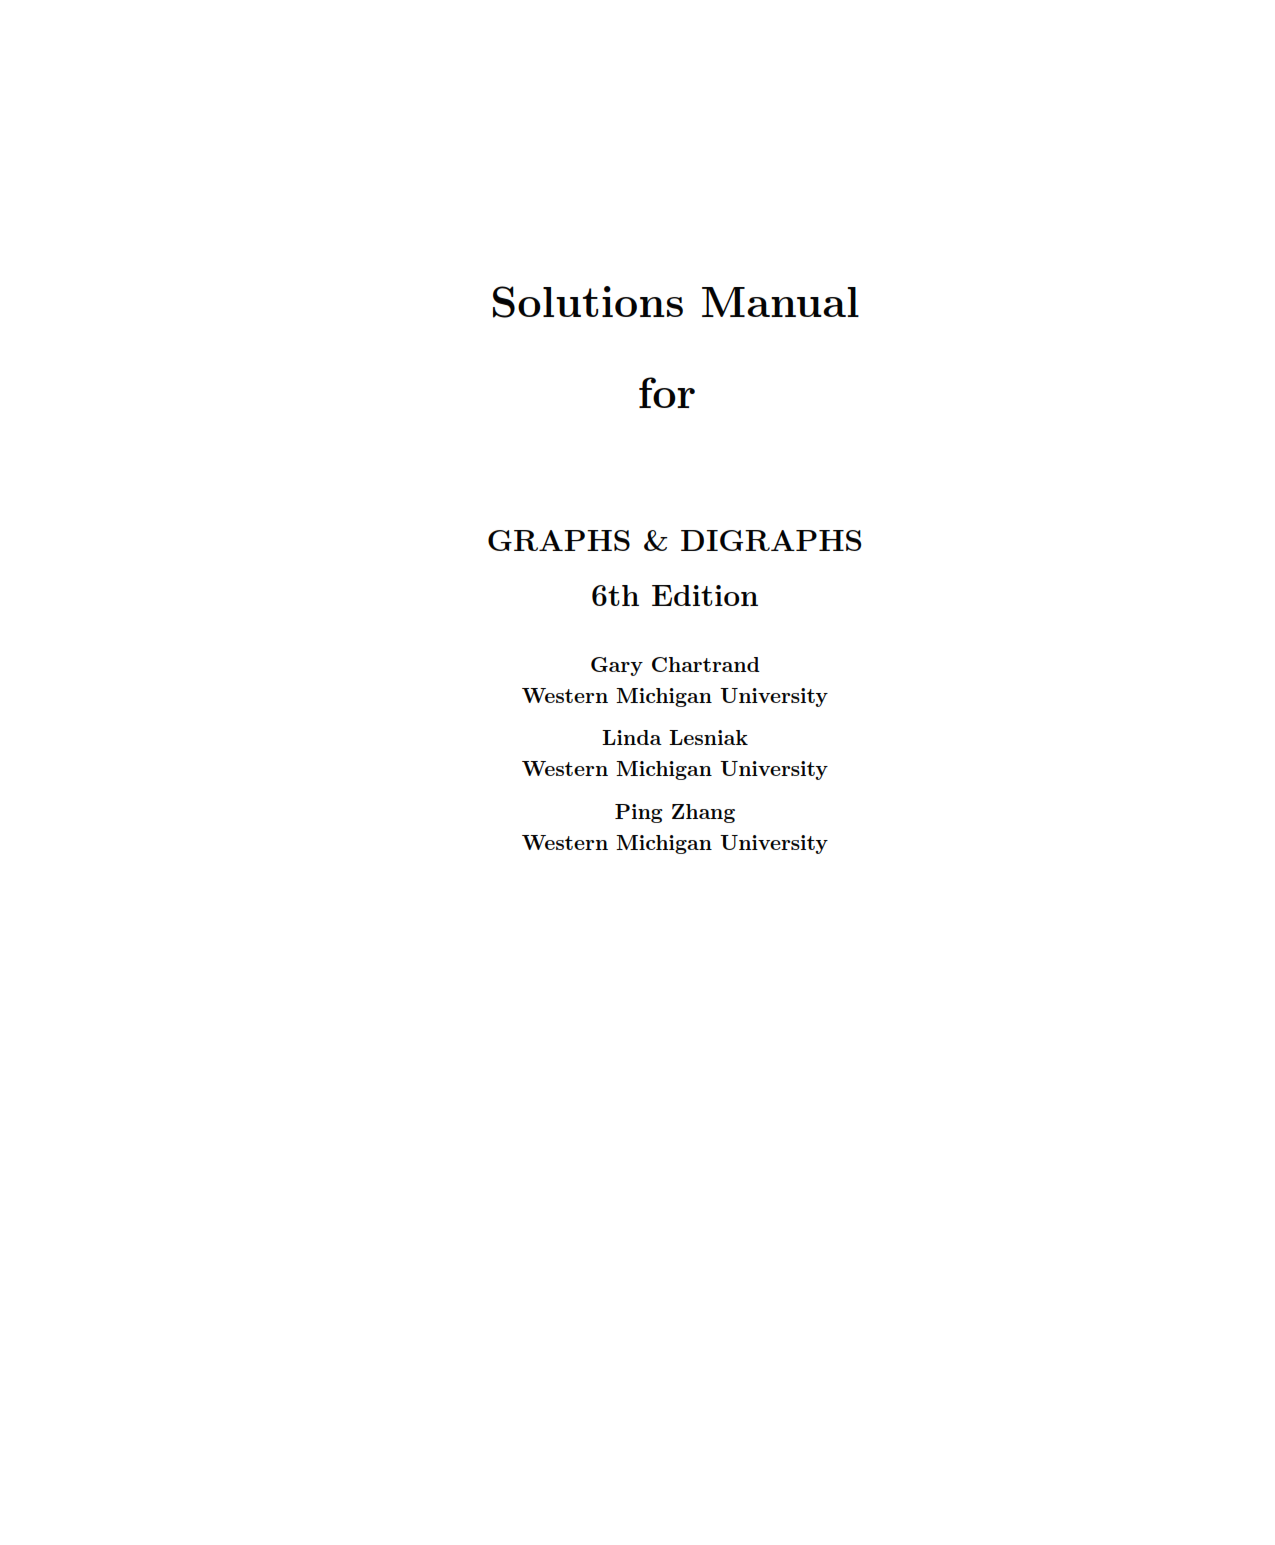 Download free graphs and digraphs Chartrand Lesniak Zhang 6th edition solutions manual eBook pdf | Gioumeh solution